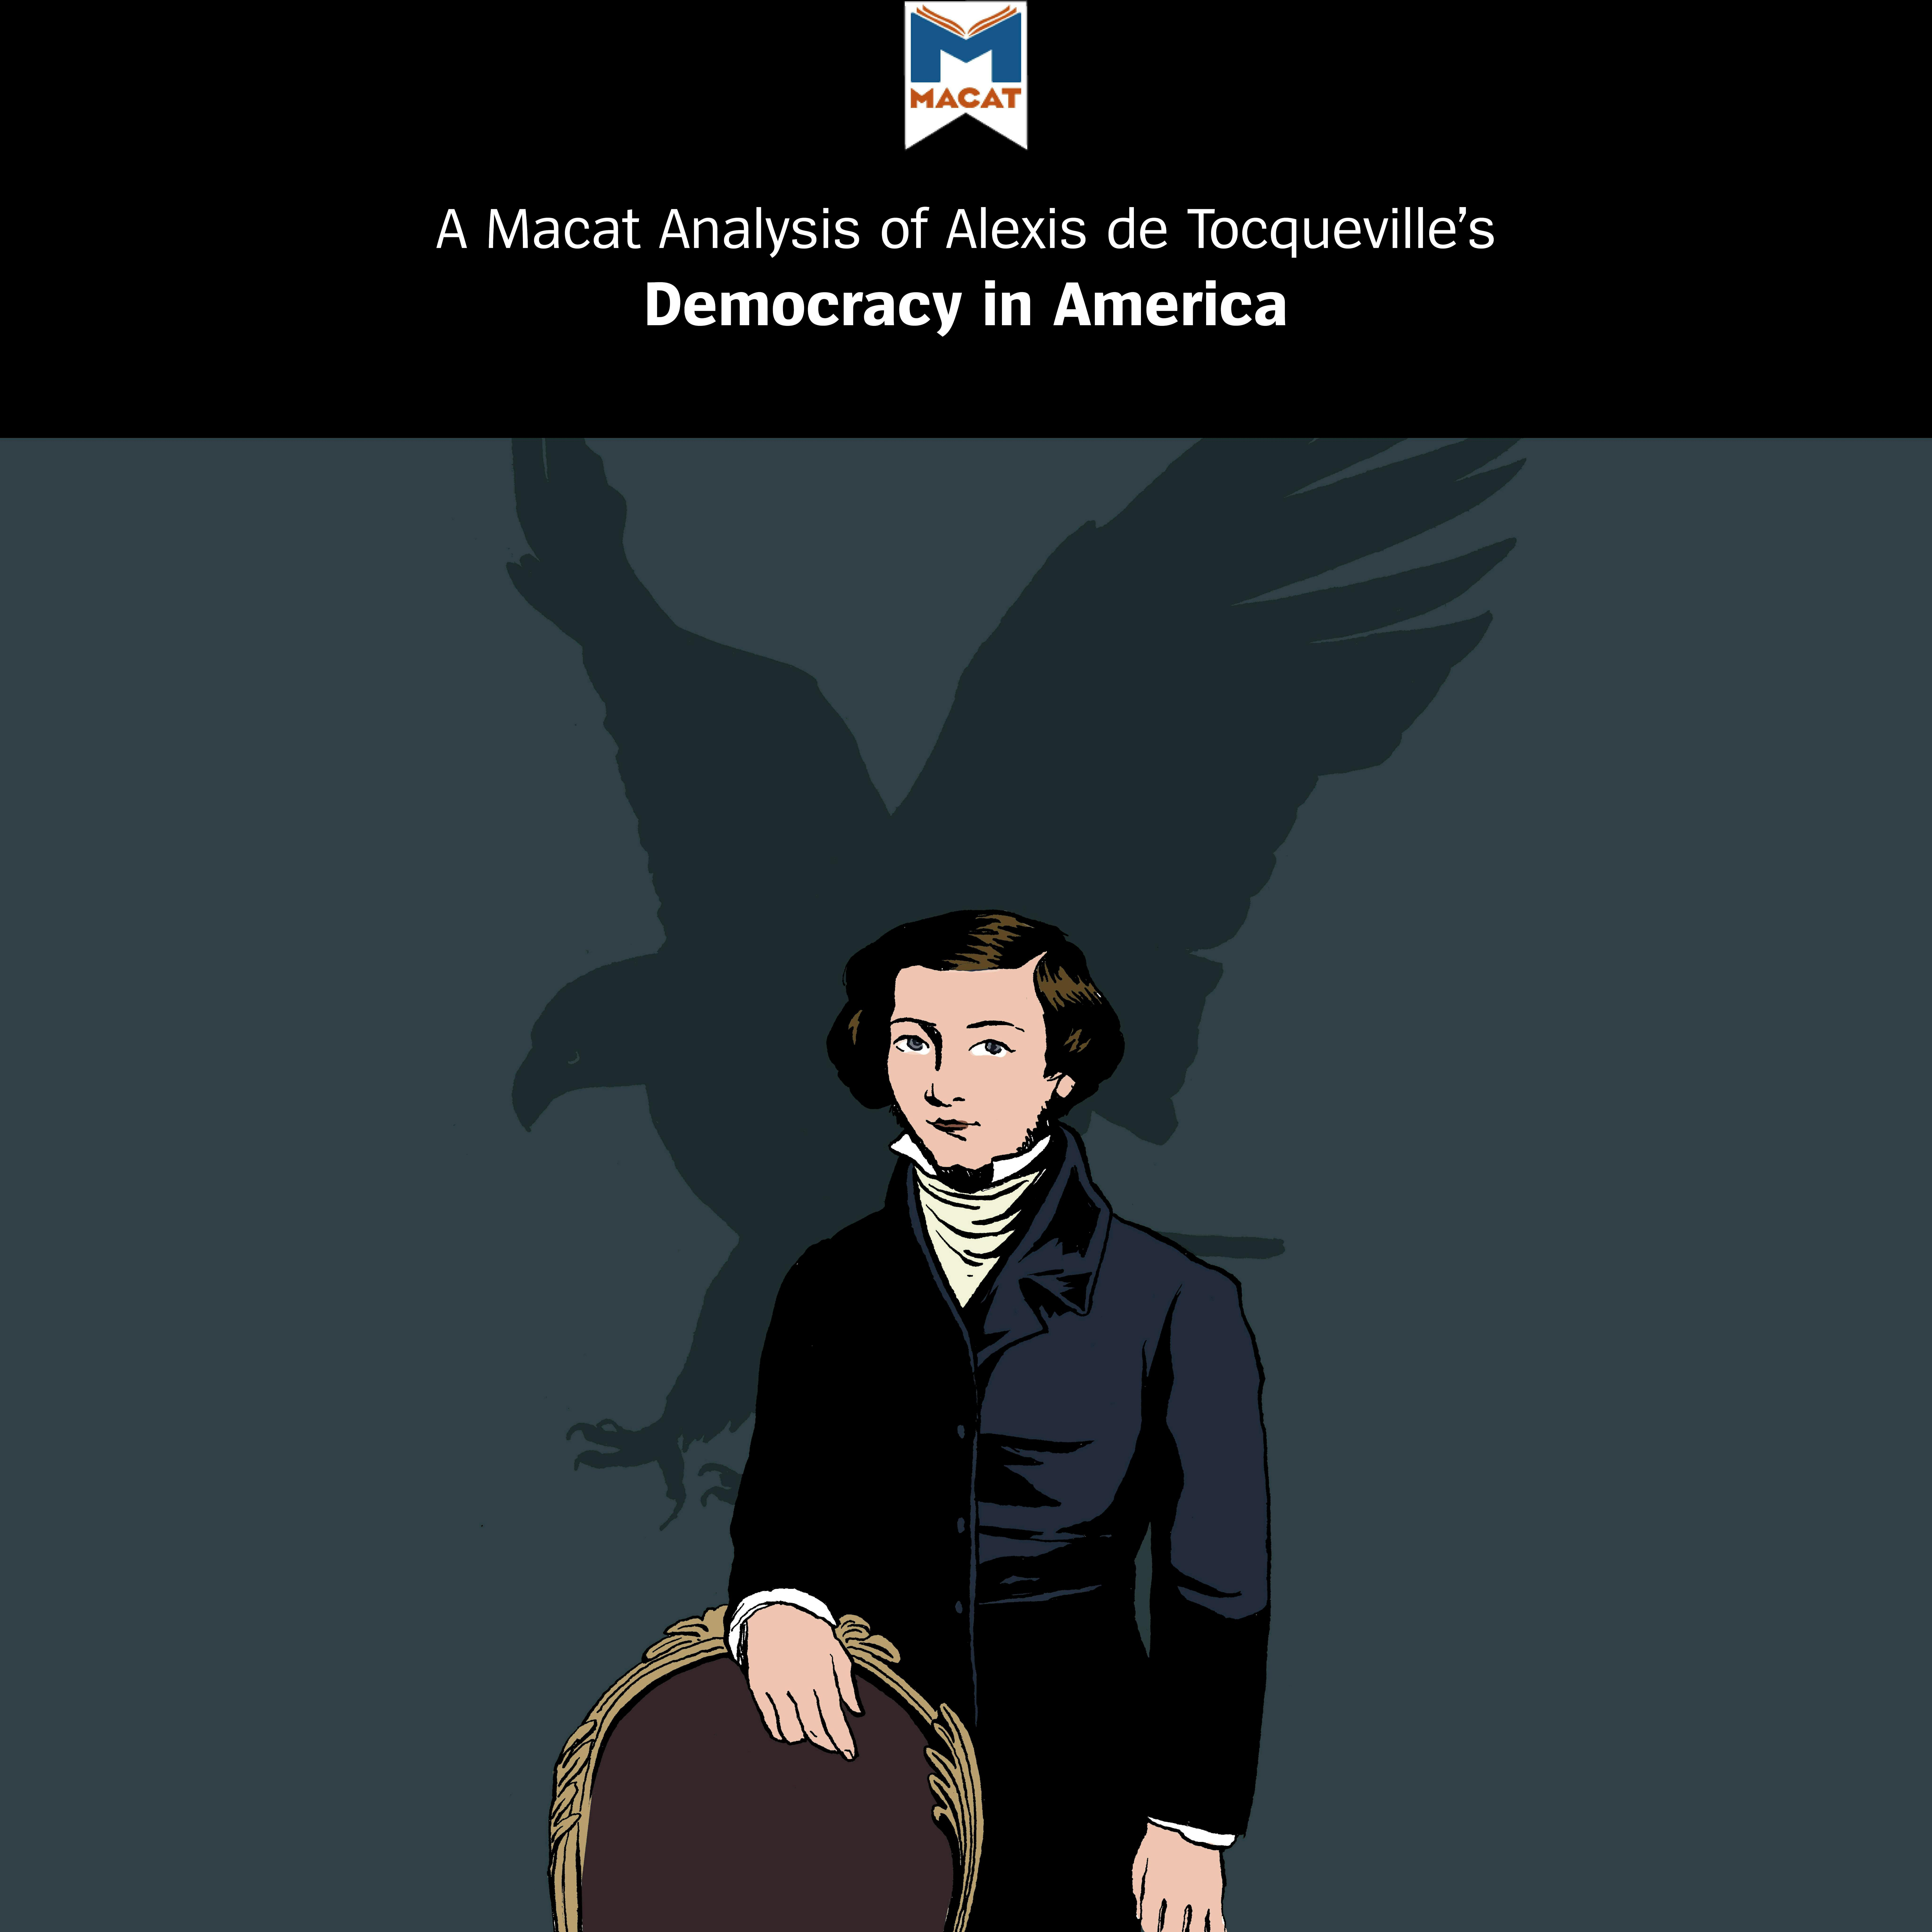 A Macat Analysis of Alexis de Tocqueville's Democracy in America - undefined